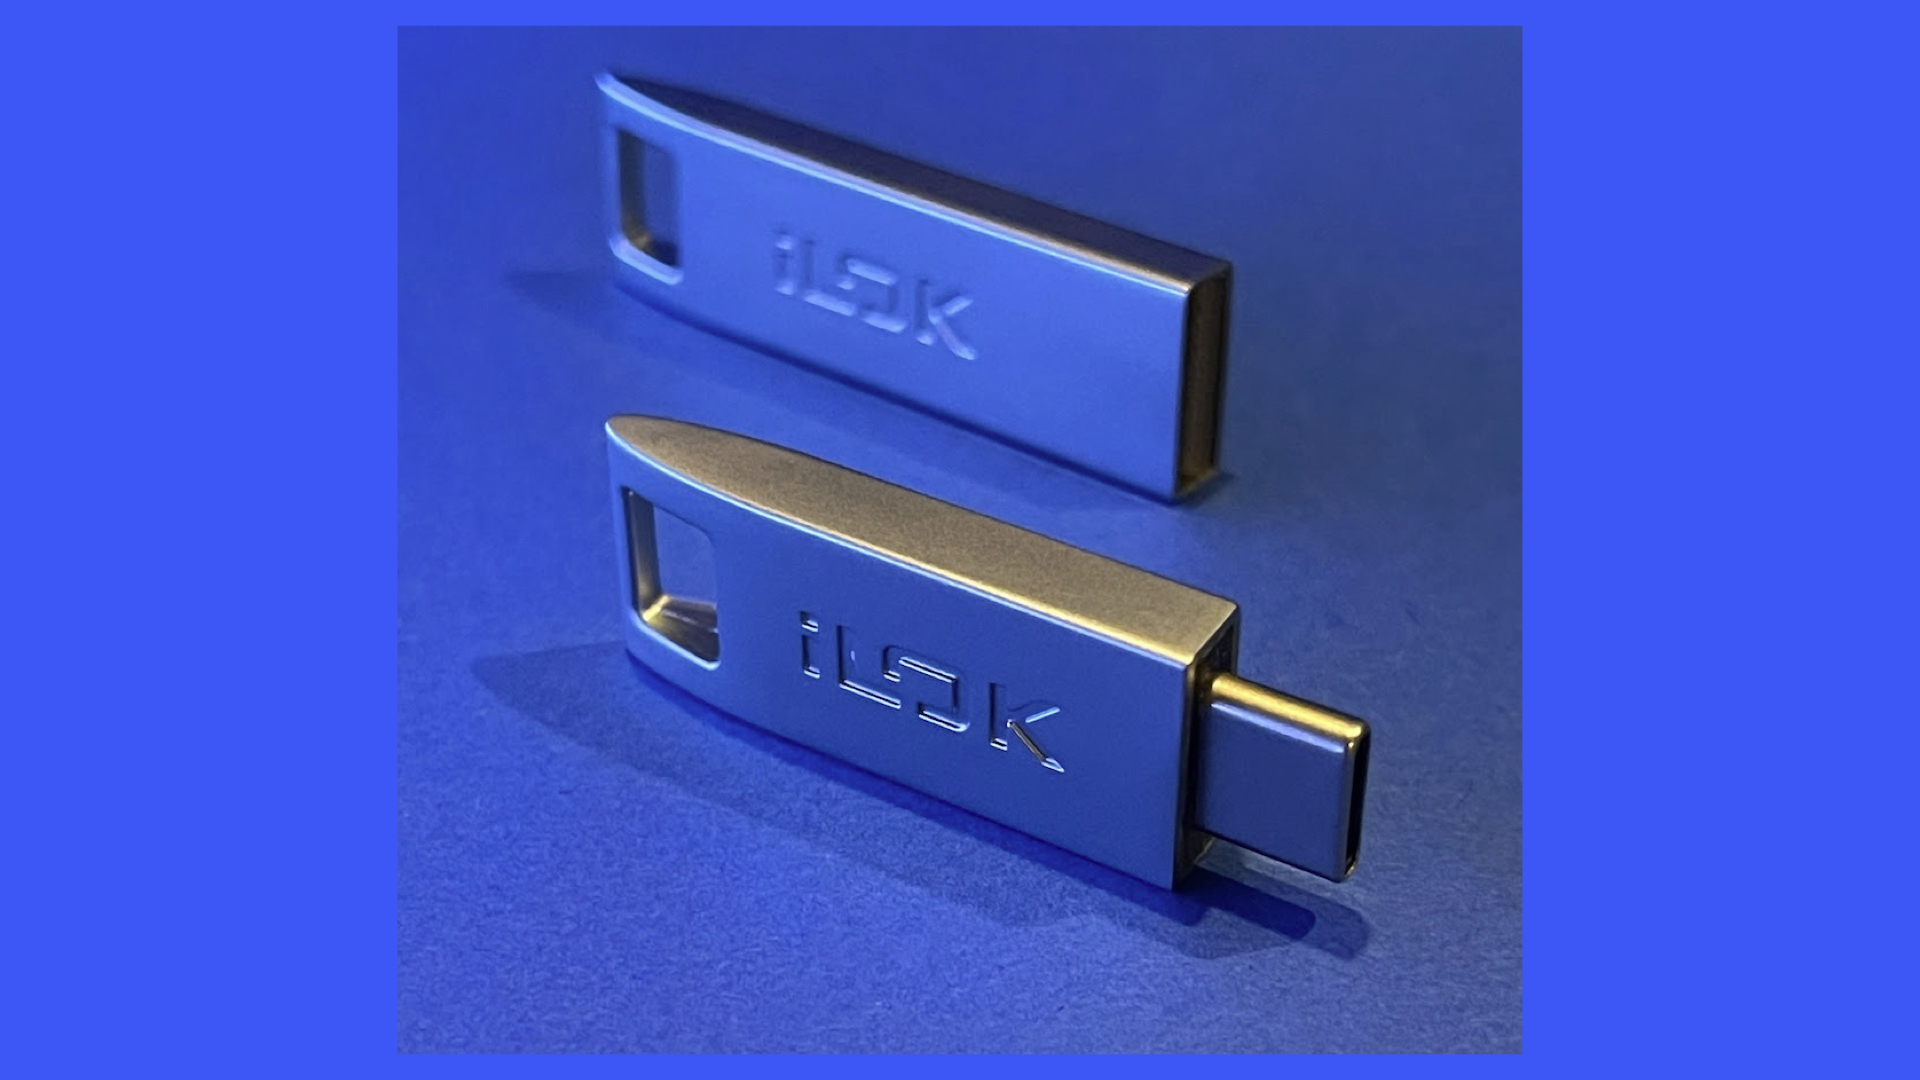 Pace Releases iLok v3 With USB-C For Modern Computers